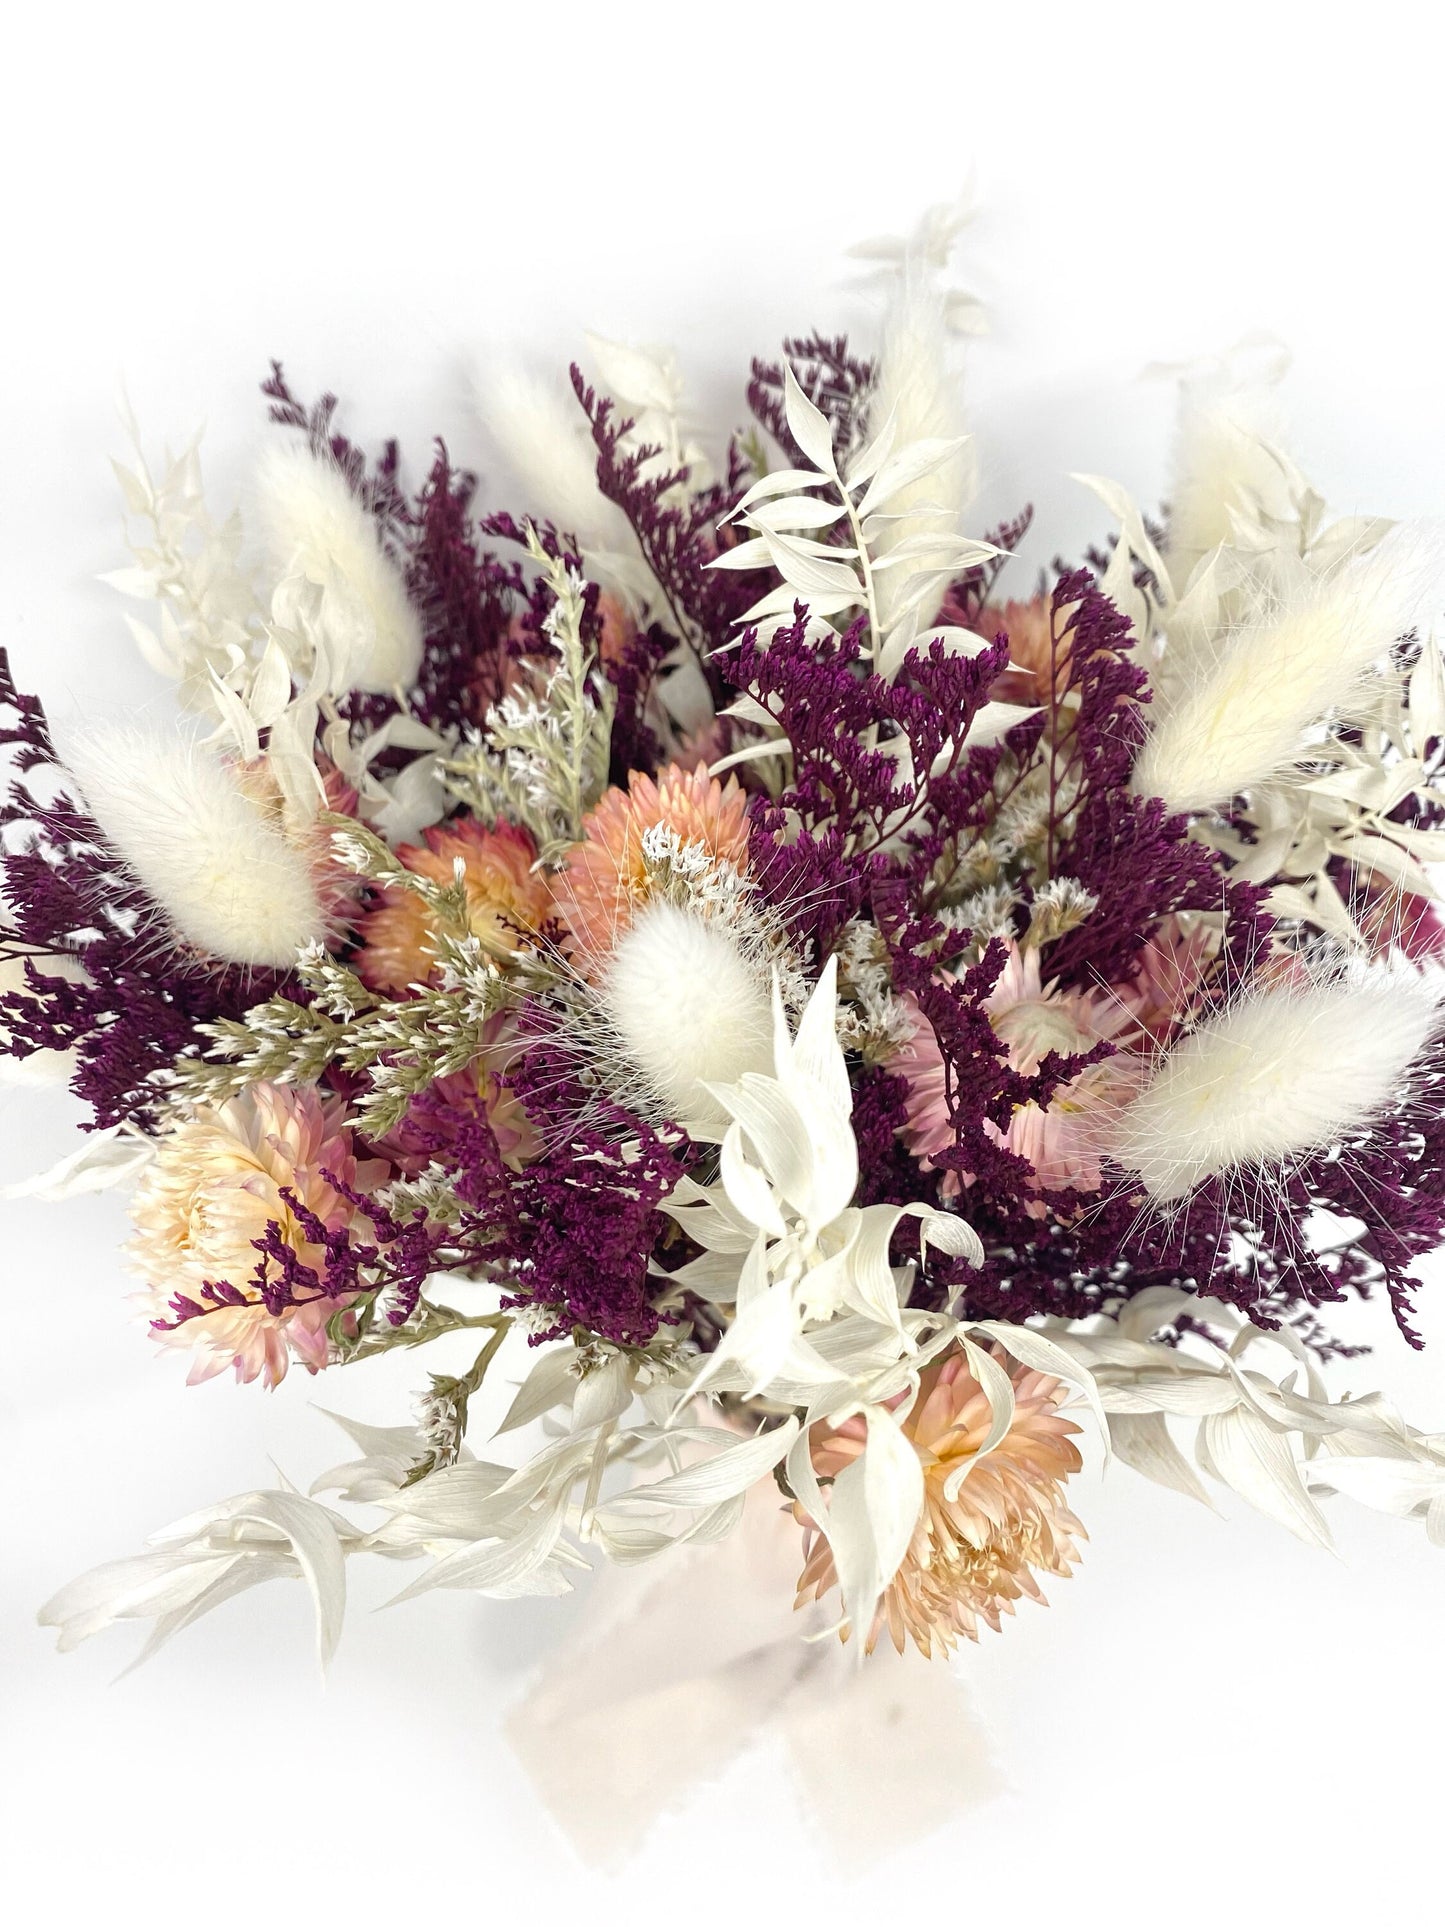 Wedding Bouquet, Dried Flowers, Preserved Floral, Rustic, Bunny Tails, Bridal, Strawflowers, Throw Bouquet, Spring, Pink, Purple, White